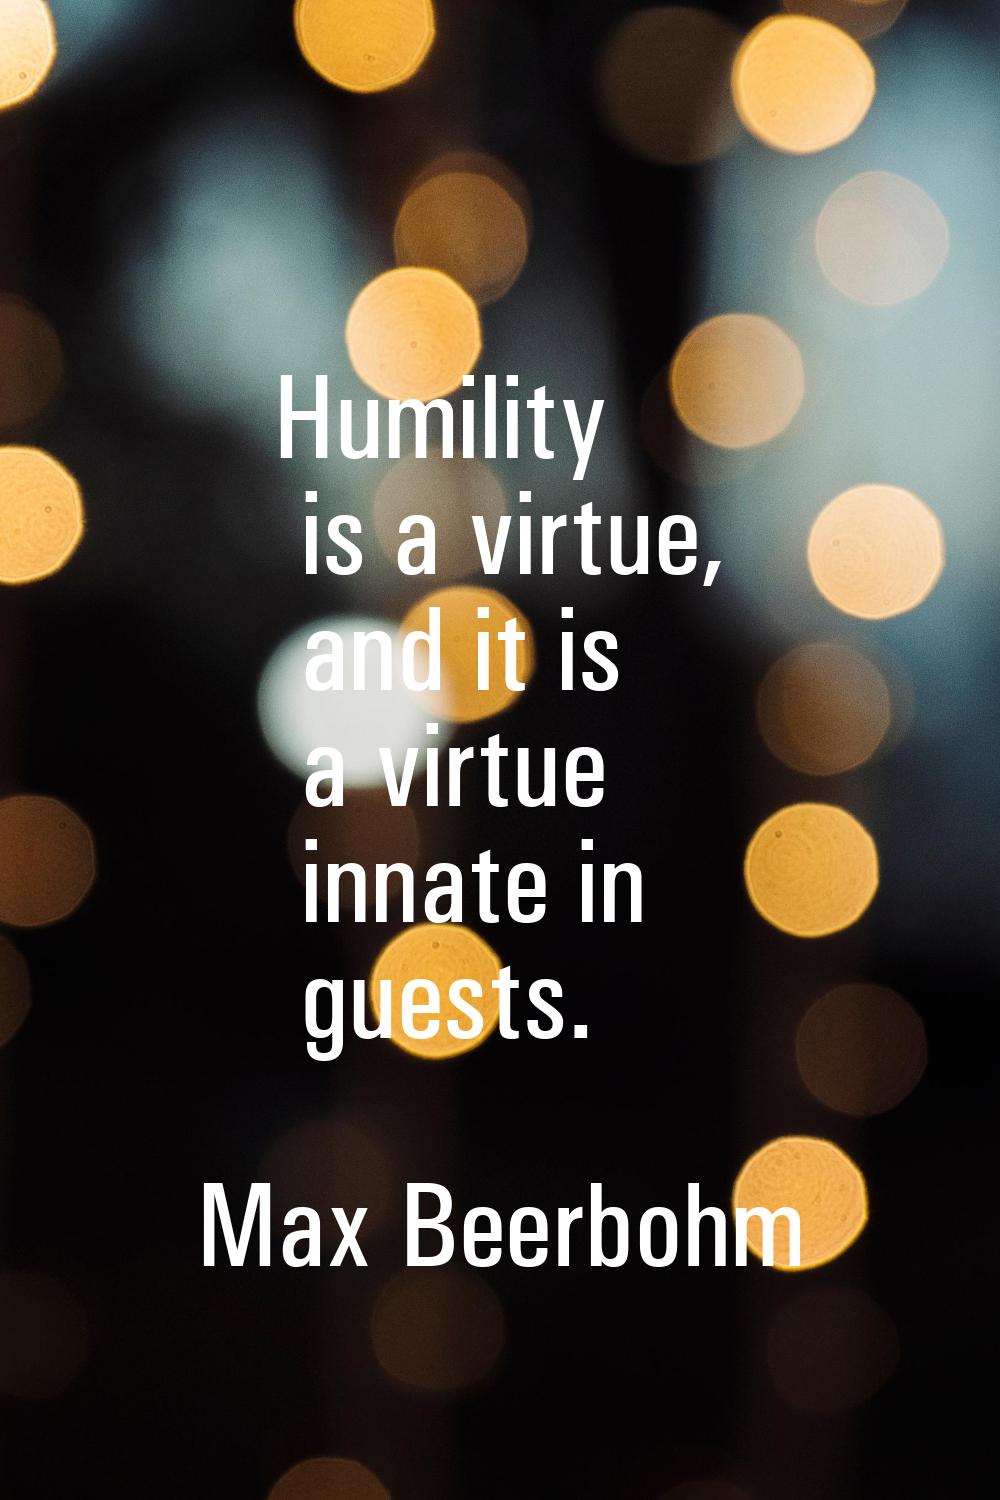 Humility is a virtue, and it is a virtue innate in guests.